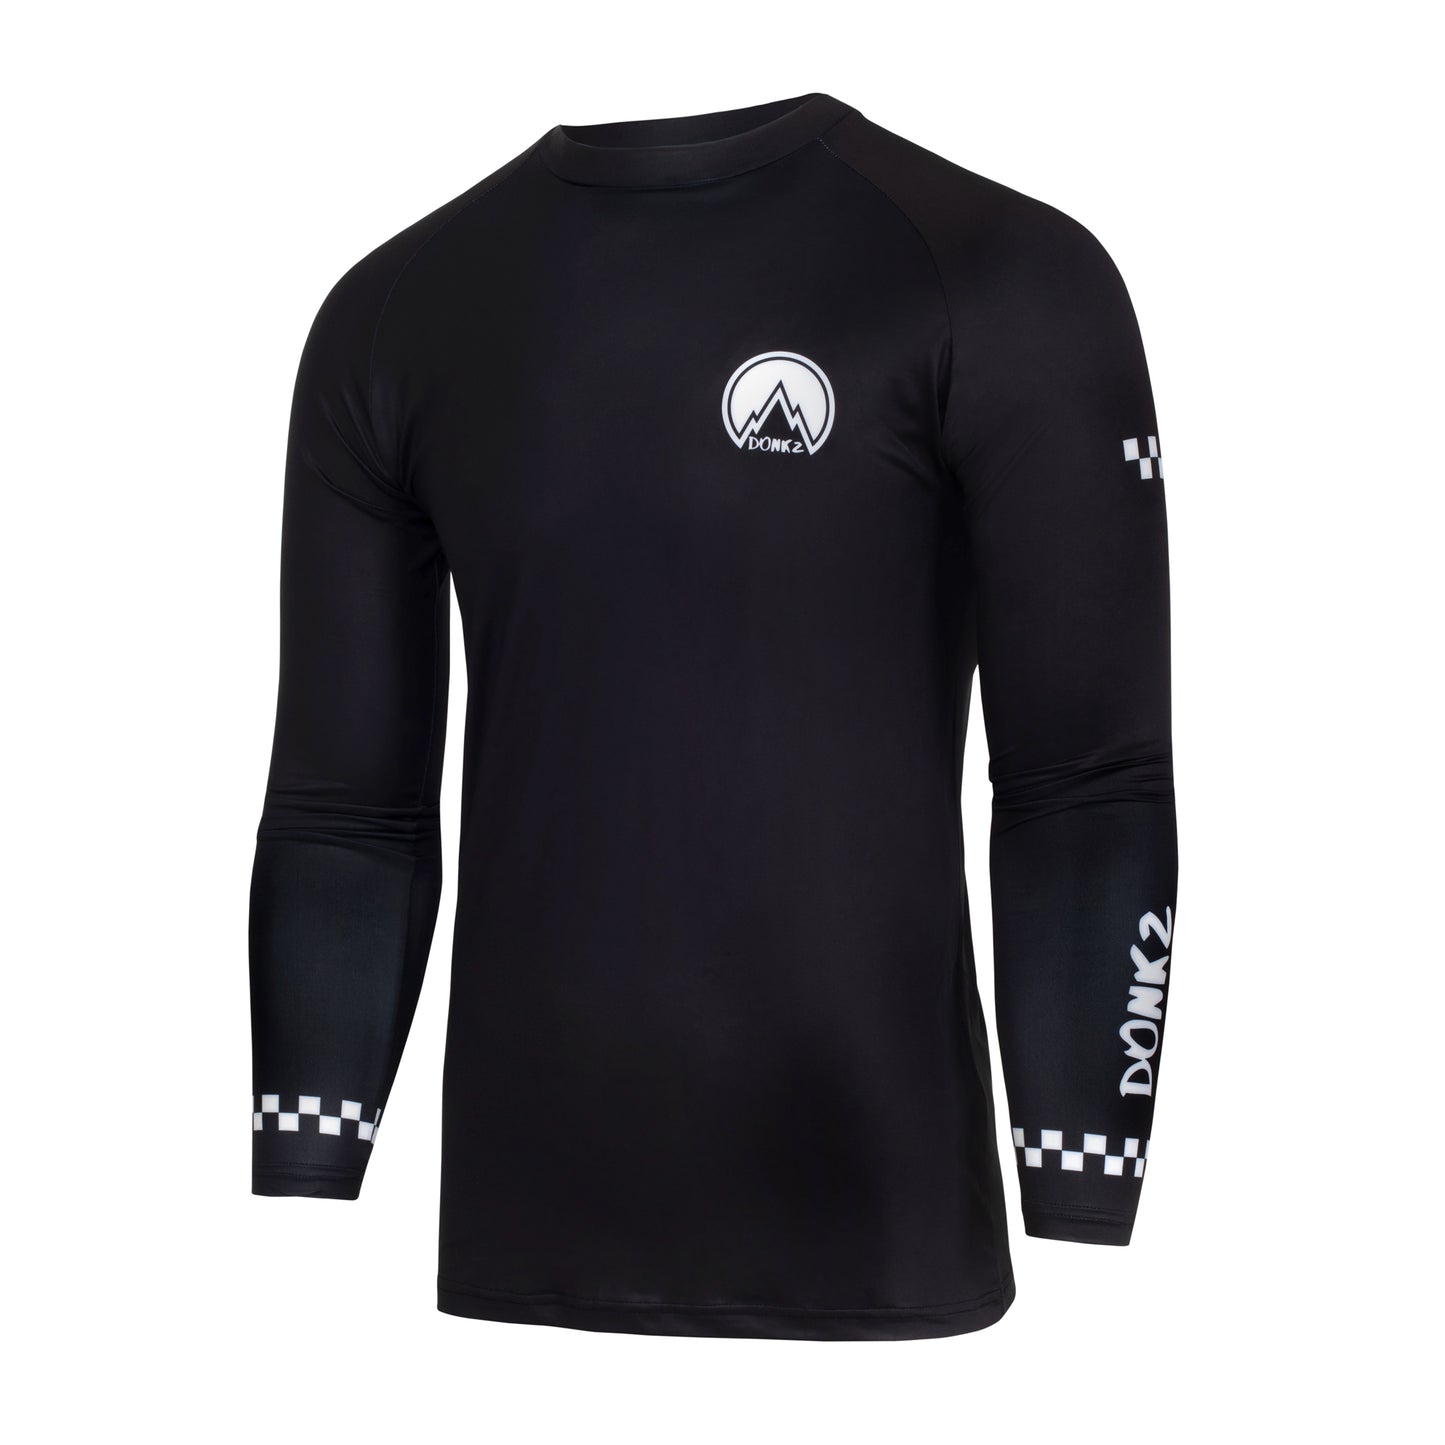 Black, stretchy, fitted compression top with white detailing